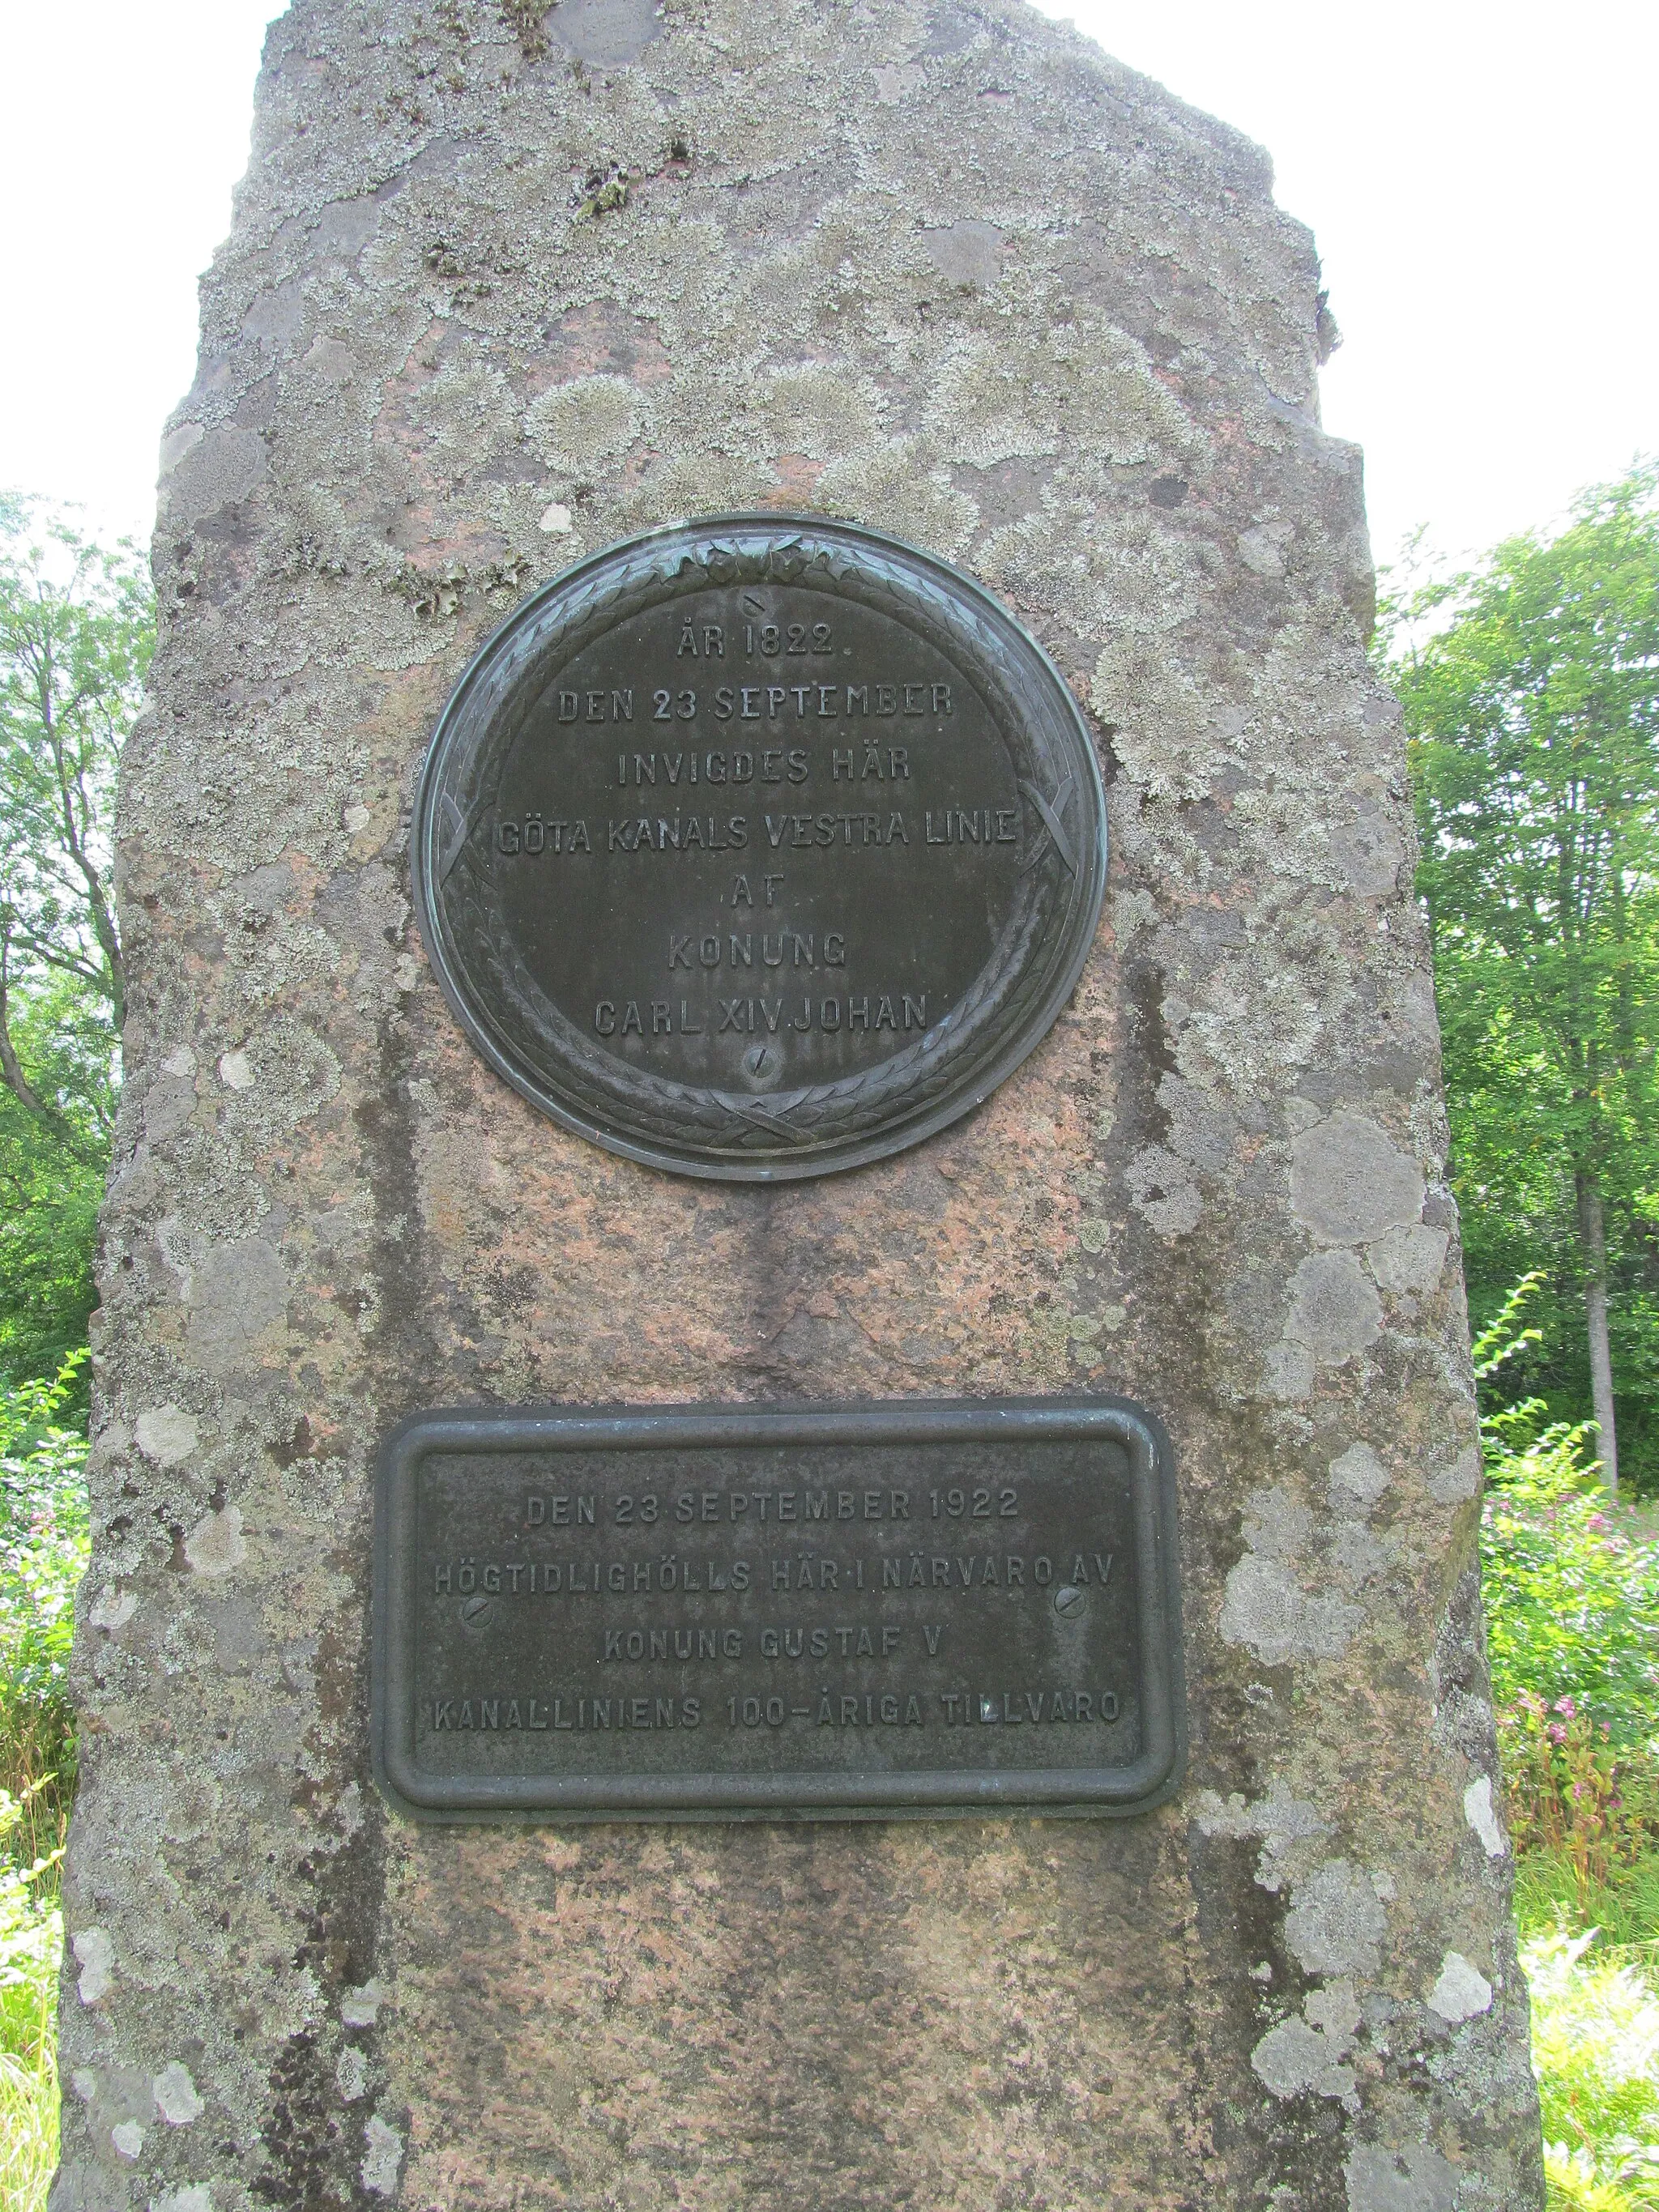 Photo showing: Memorial stone in Hajstorp, Töreboda Municipality, Sweden, commemorating the inauguration in 1822 and the 100th anniversary in 1922 of Göta Canal in Västergötland.